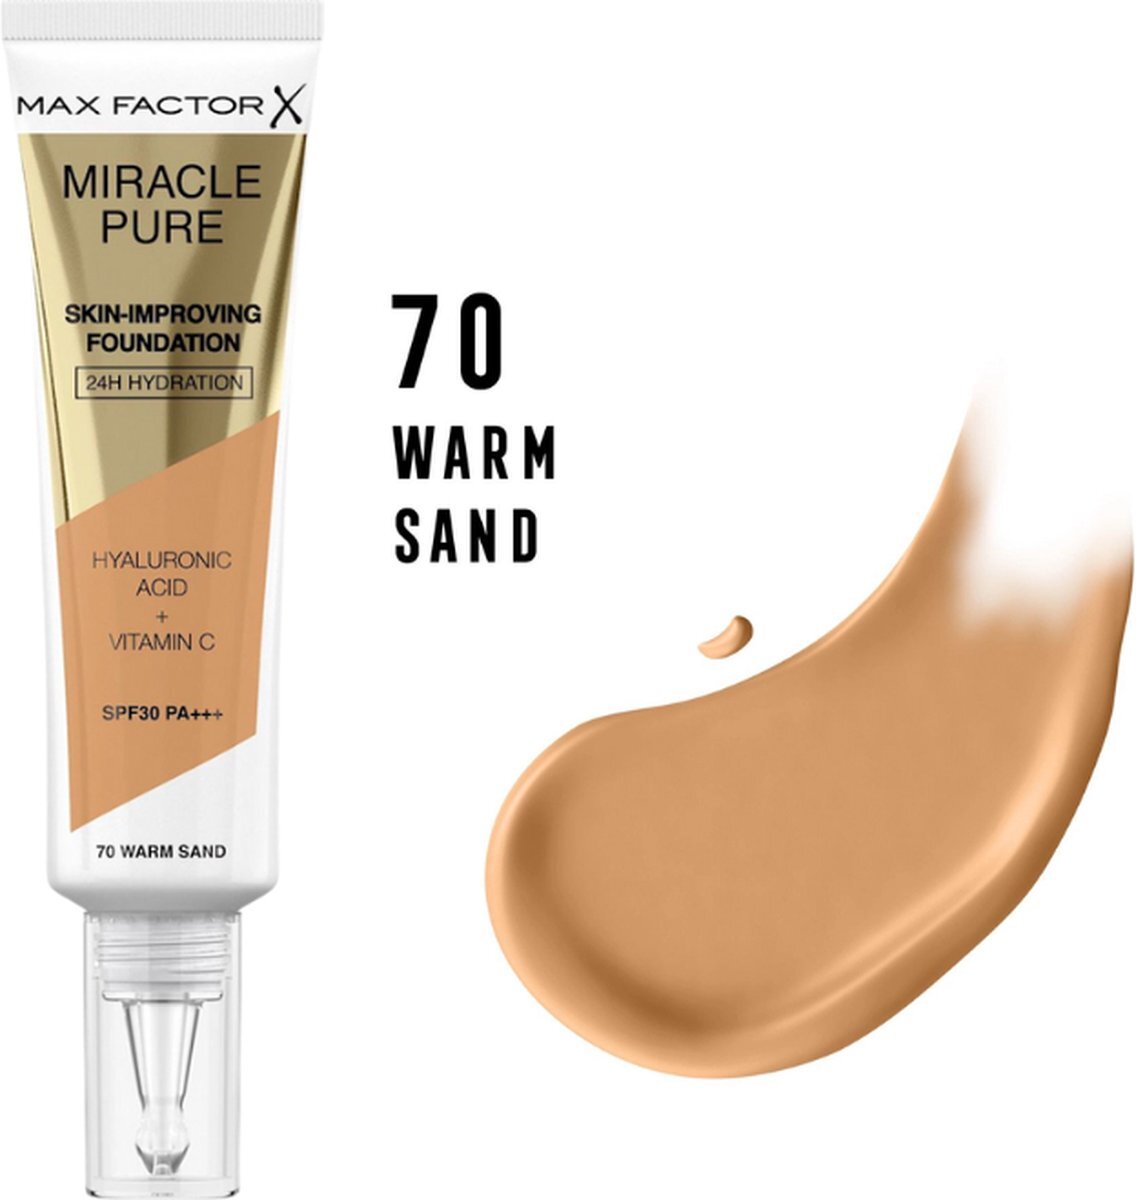 Max Factor Miracle Pure Skin-Improving Foundation - 70 Warm Sand